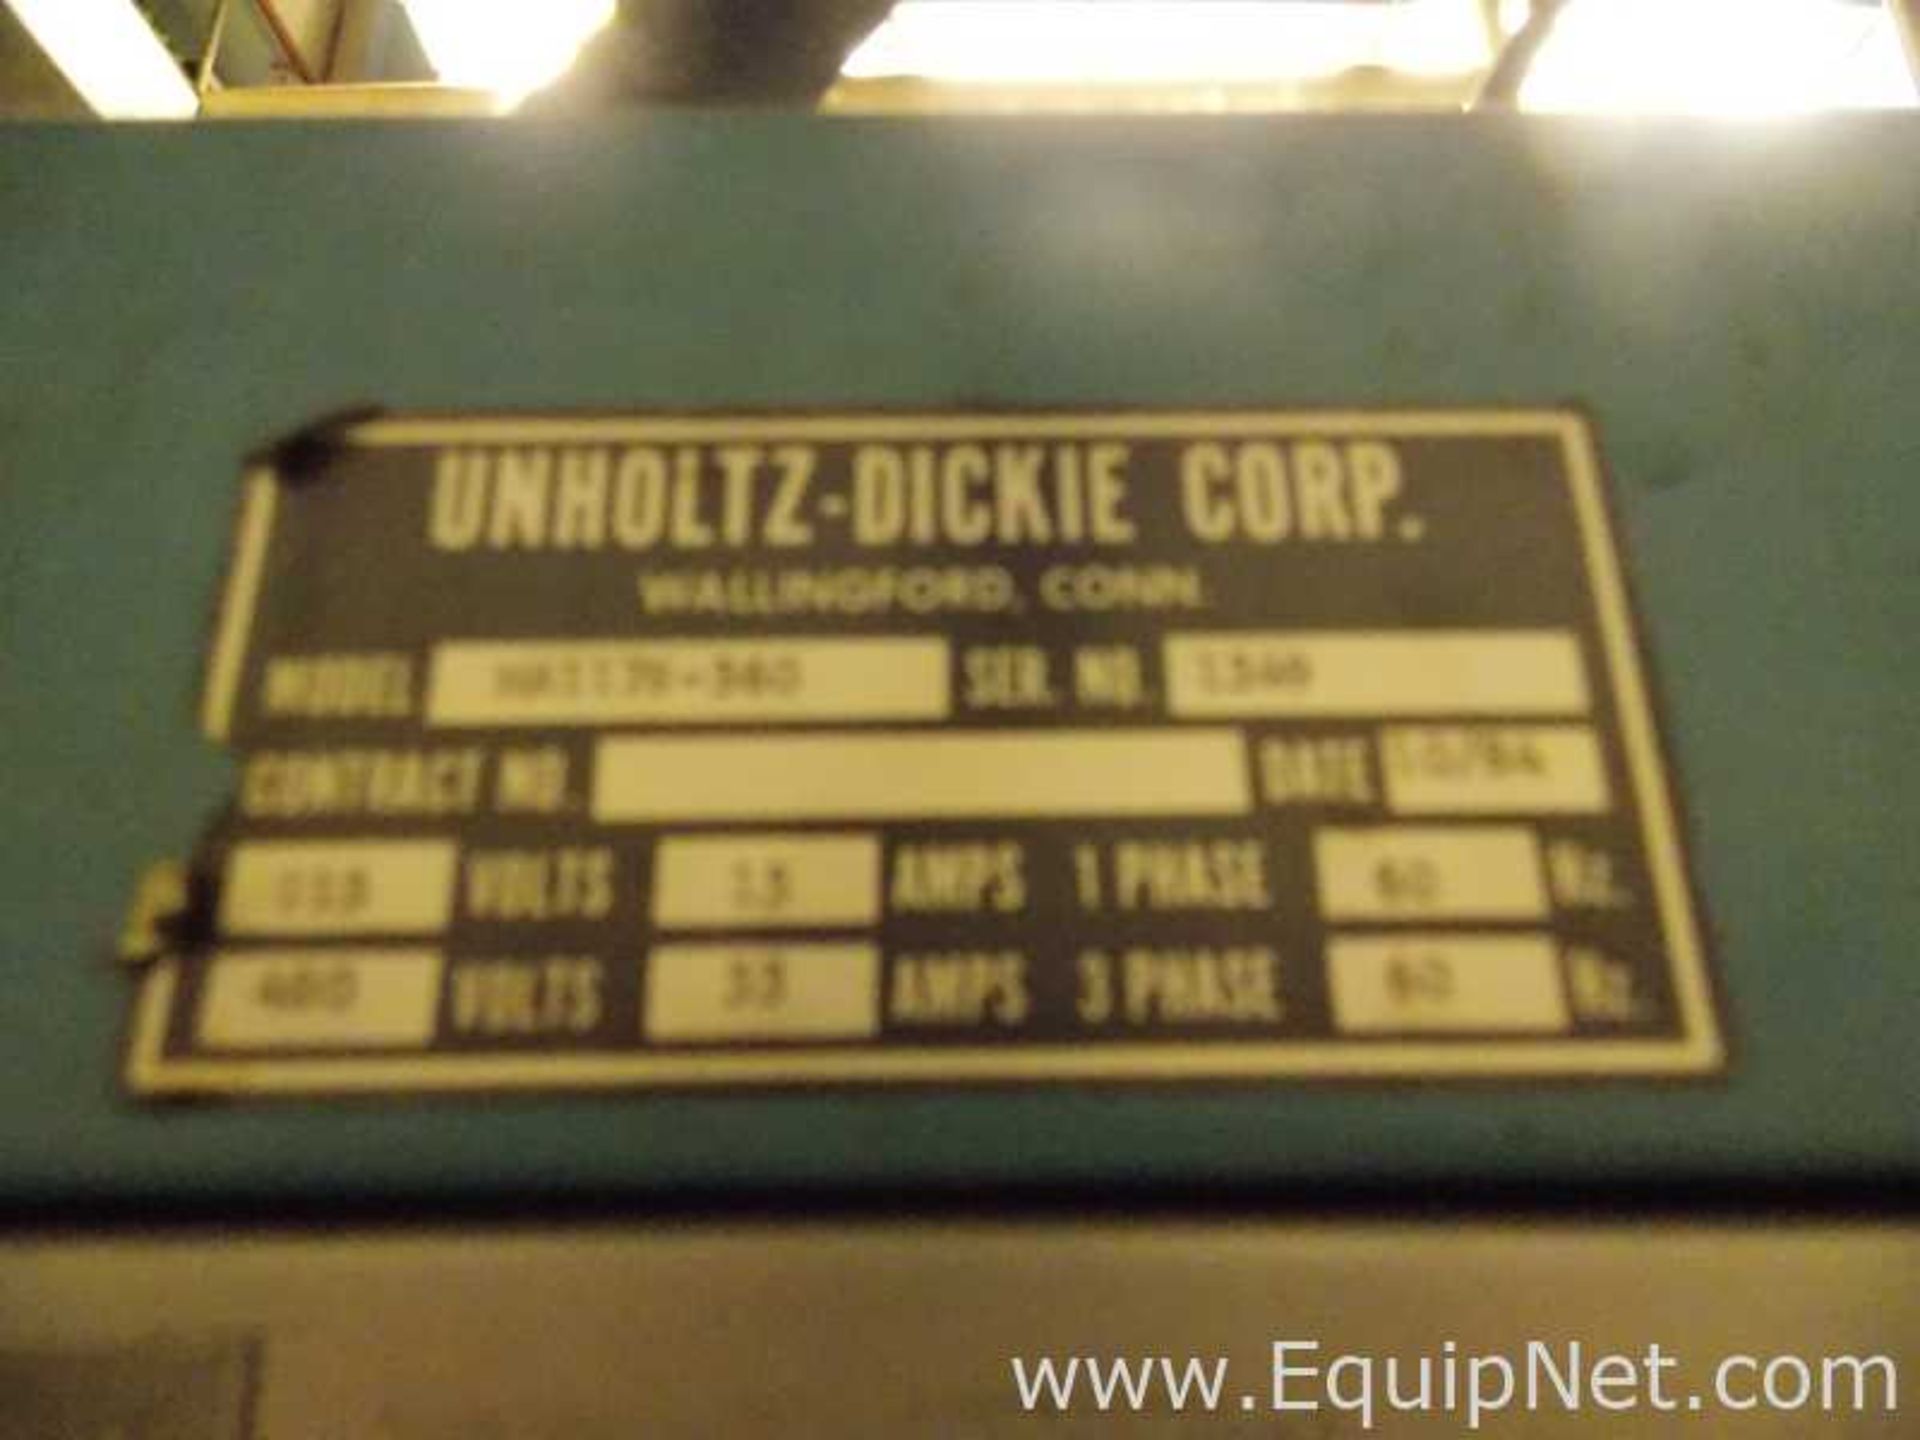 EQUIPNET LISTING #775378; REMOVAL COST: TBD; MODEL: 560; DESCRIPTION: Unholtz-Dickie 560 Electric - Image 10 of 10